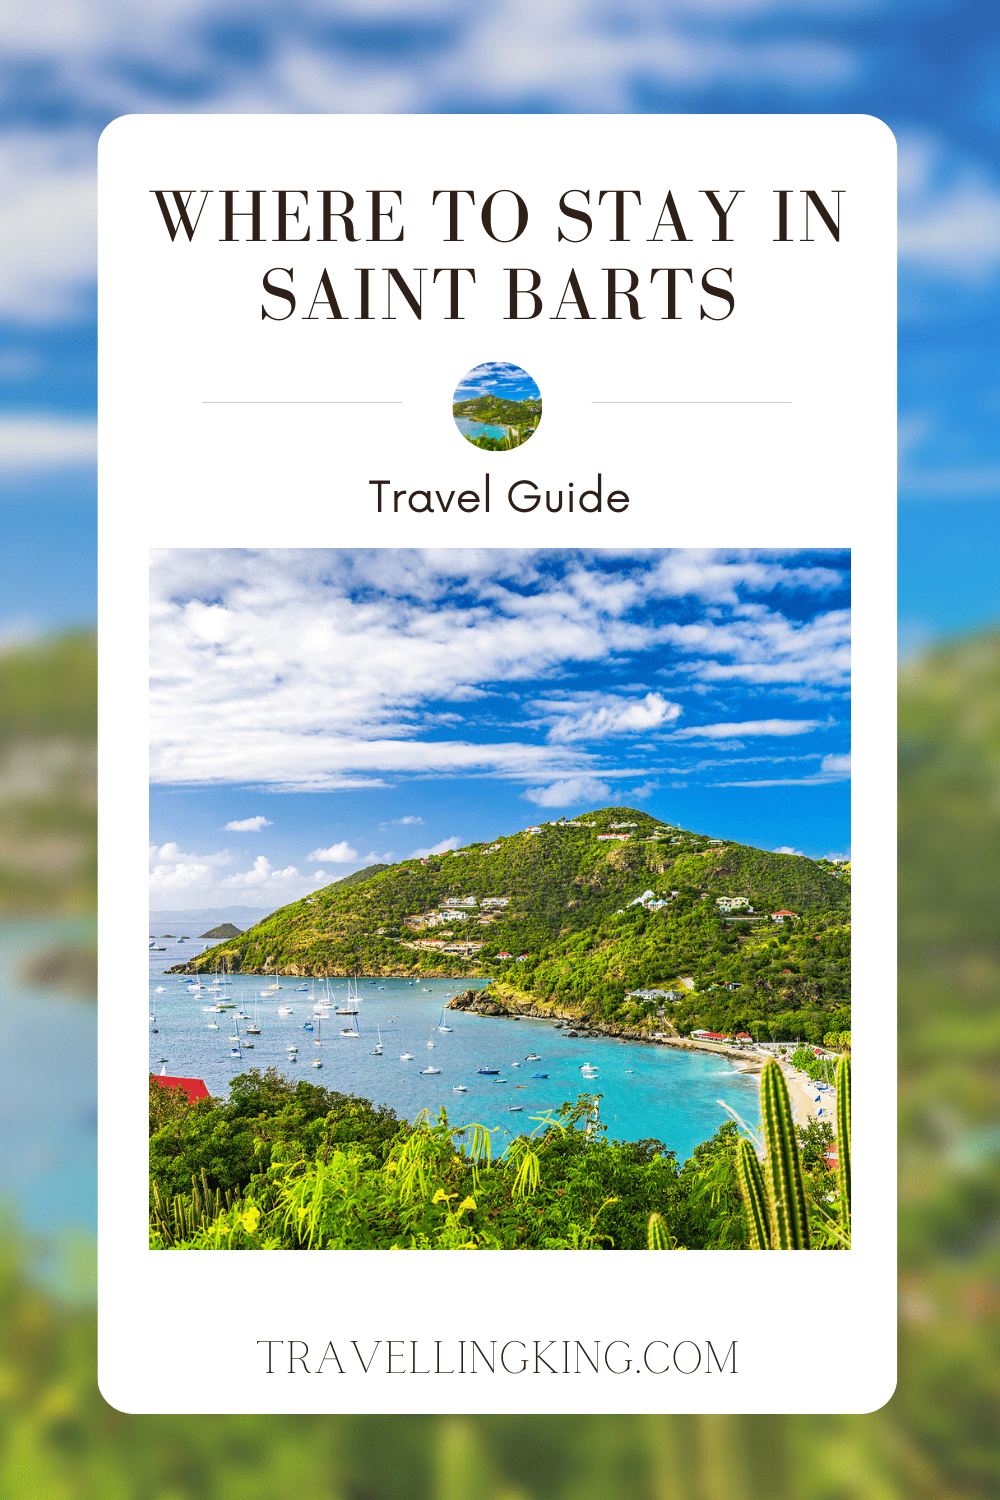 Where to stay in Saint Barts